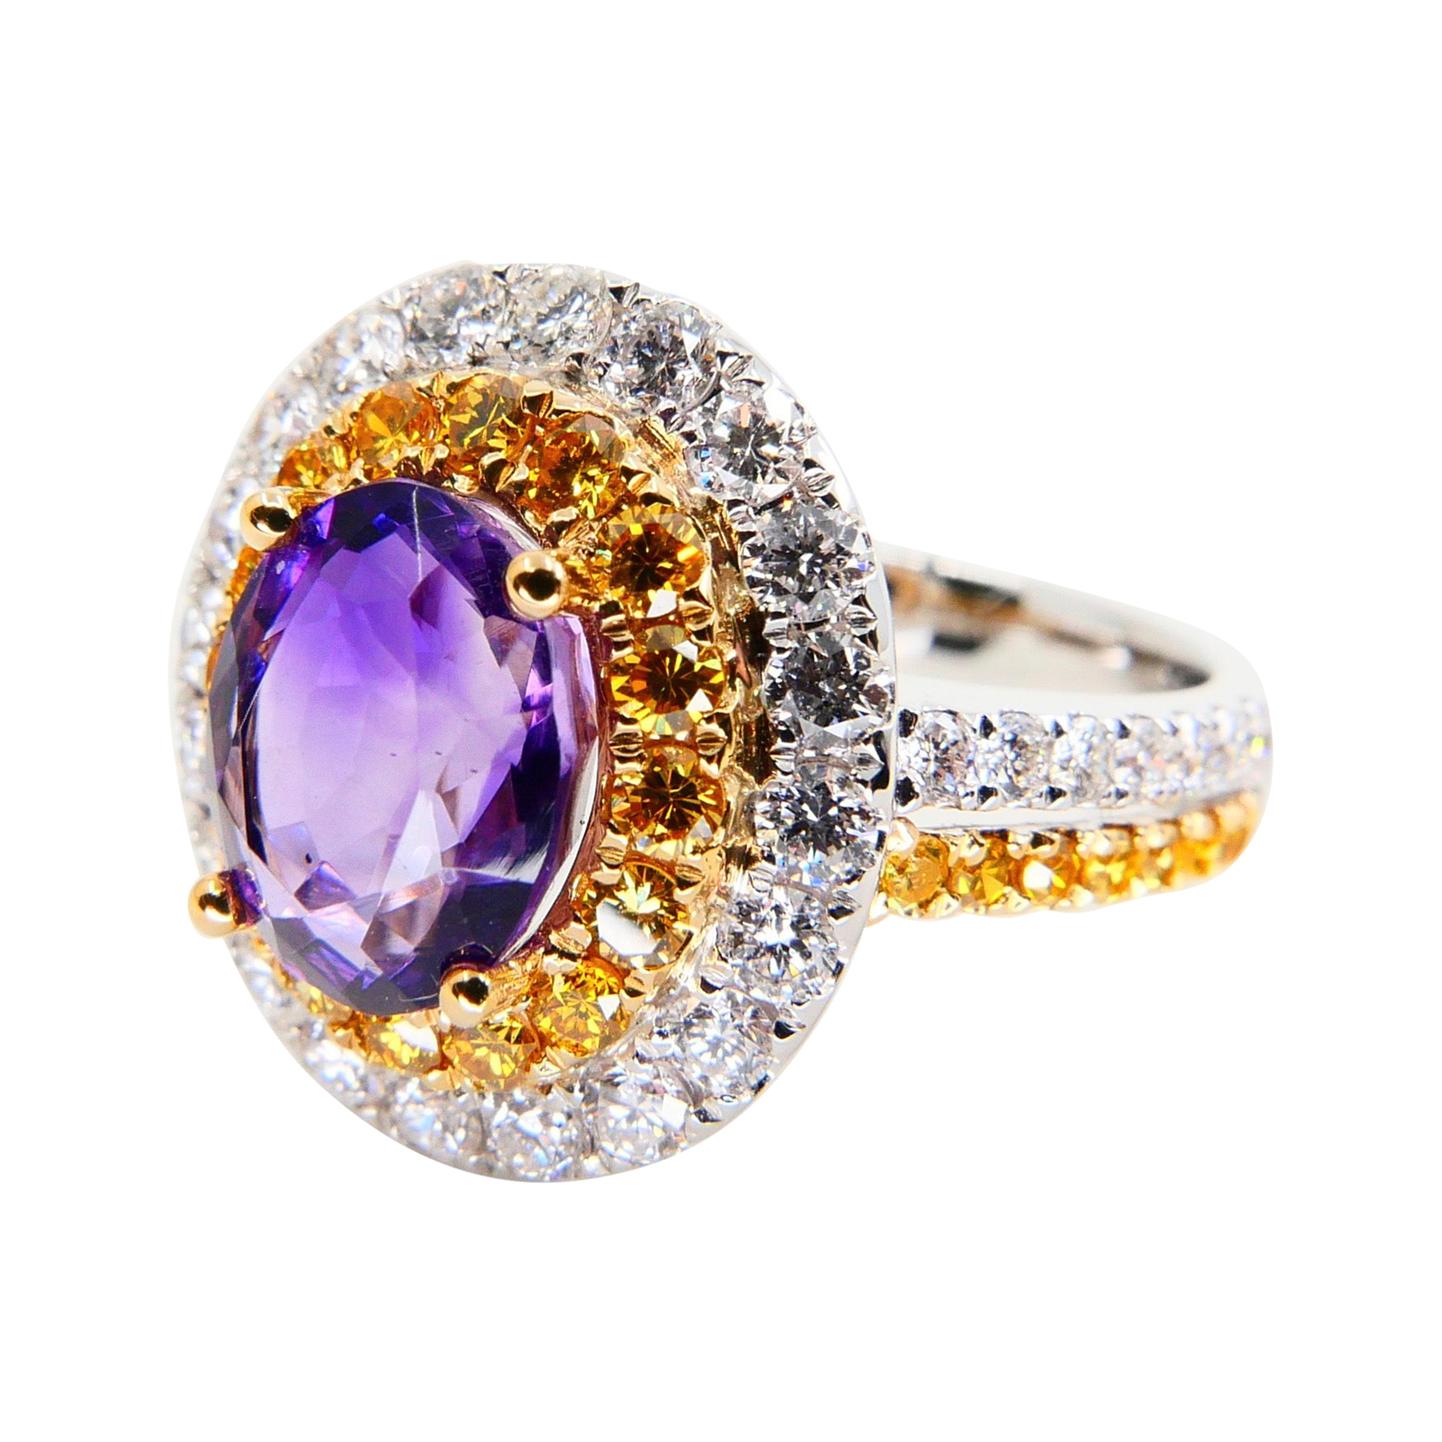 Oval Cut 18k White Gold Amethyst Cocktail Ring with Fancy Vivid Yellow and White Diamonds